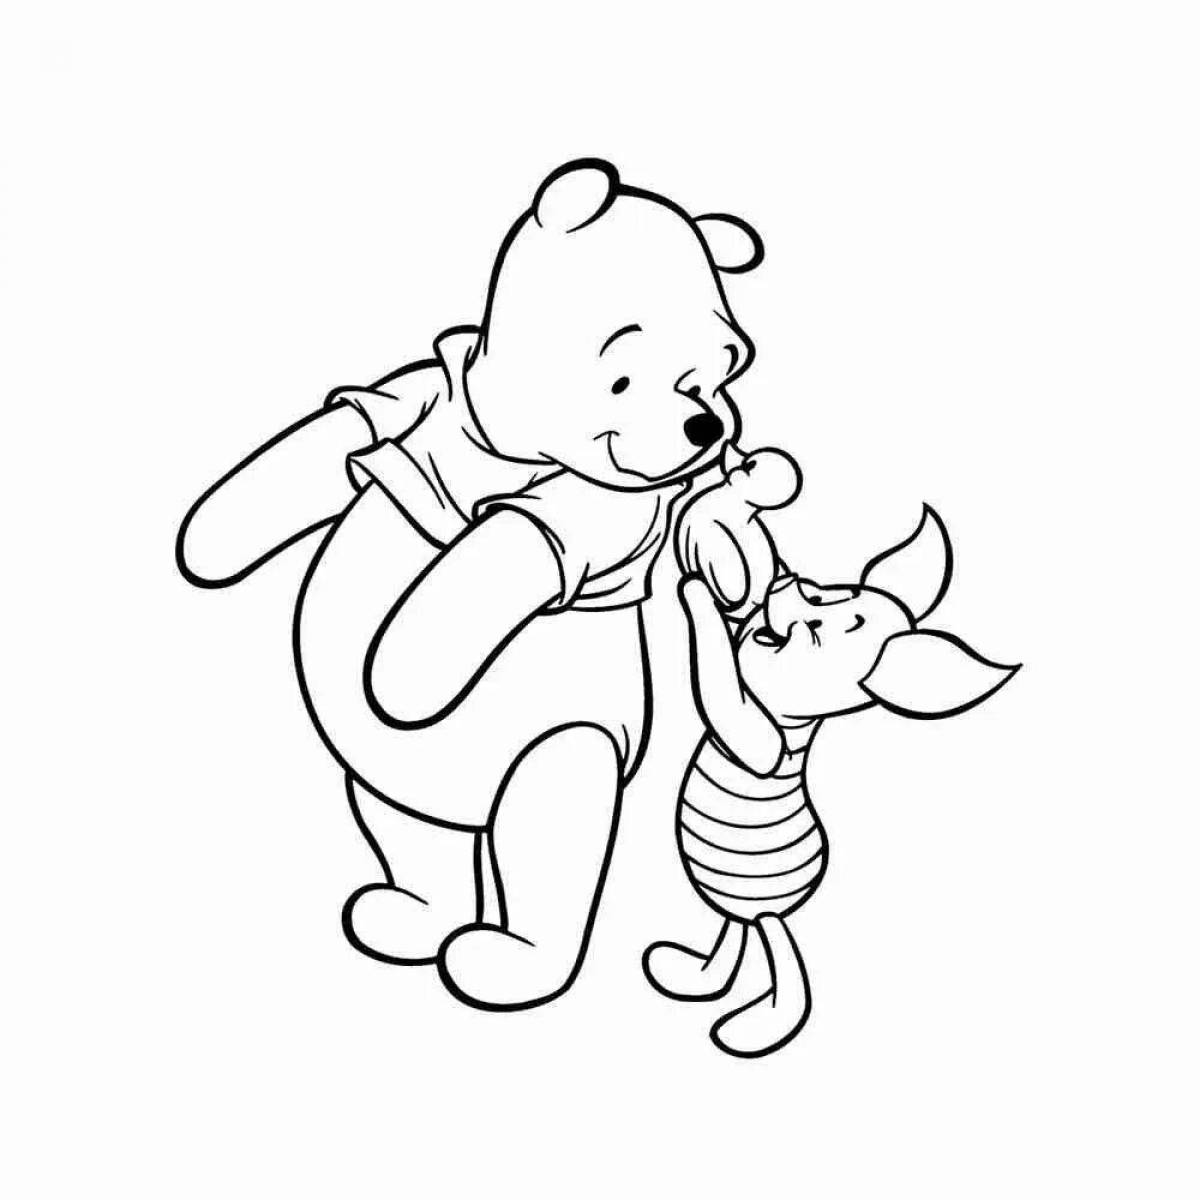 Coloring page loving Winnie the Pooh and Piglet